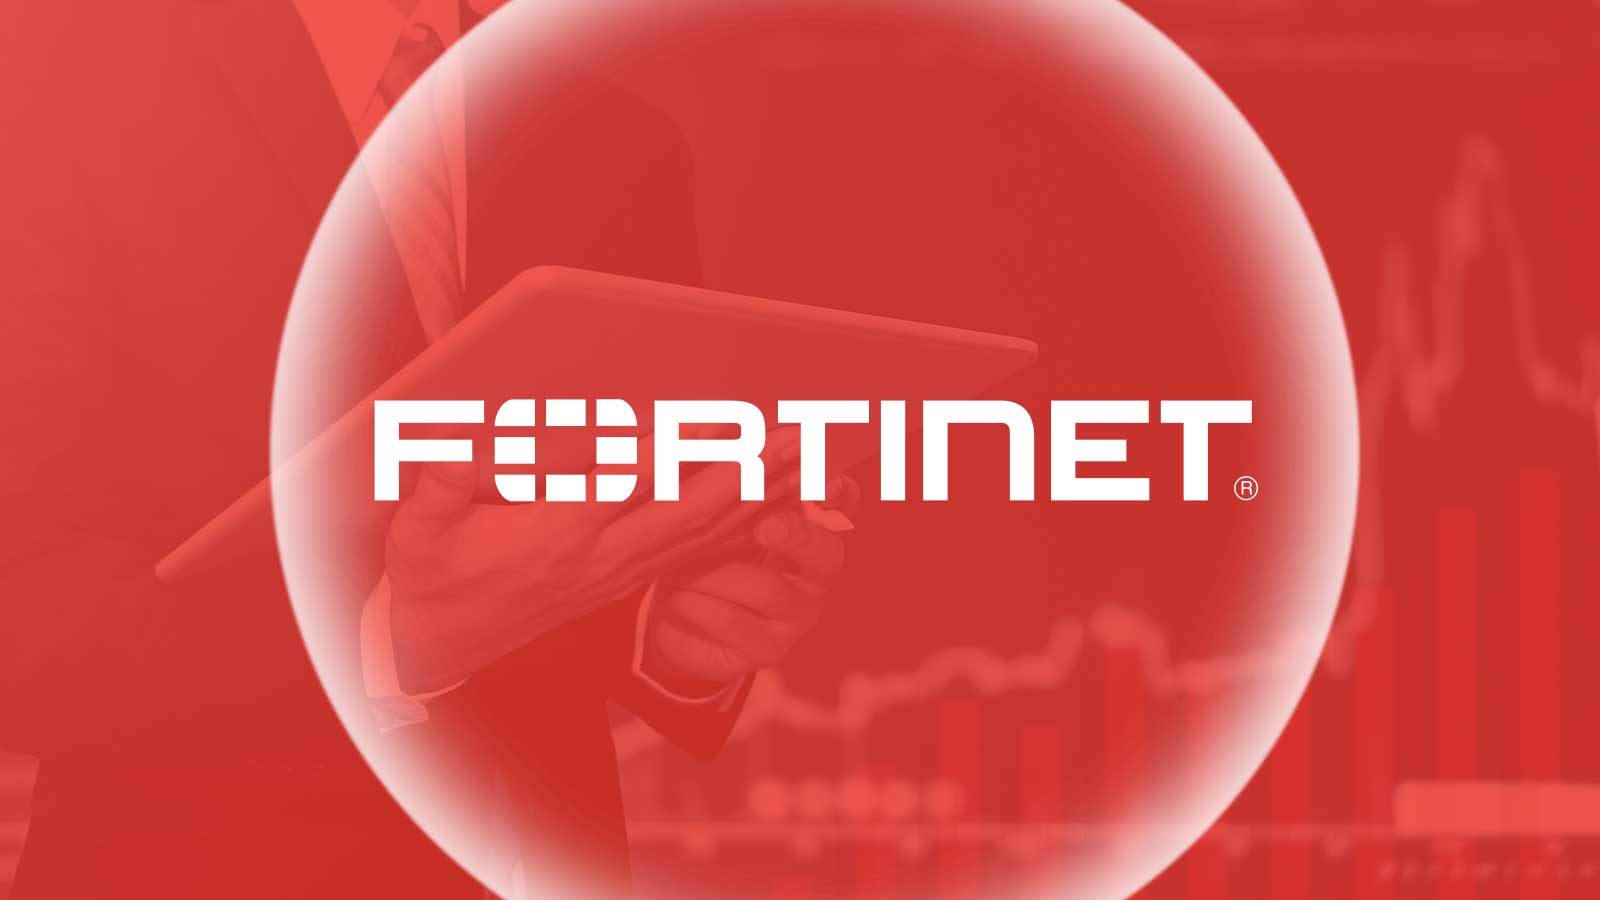 Fortinet launches the world's first 